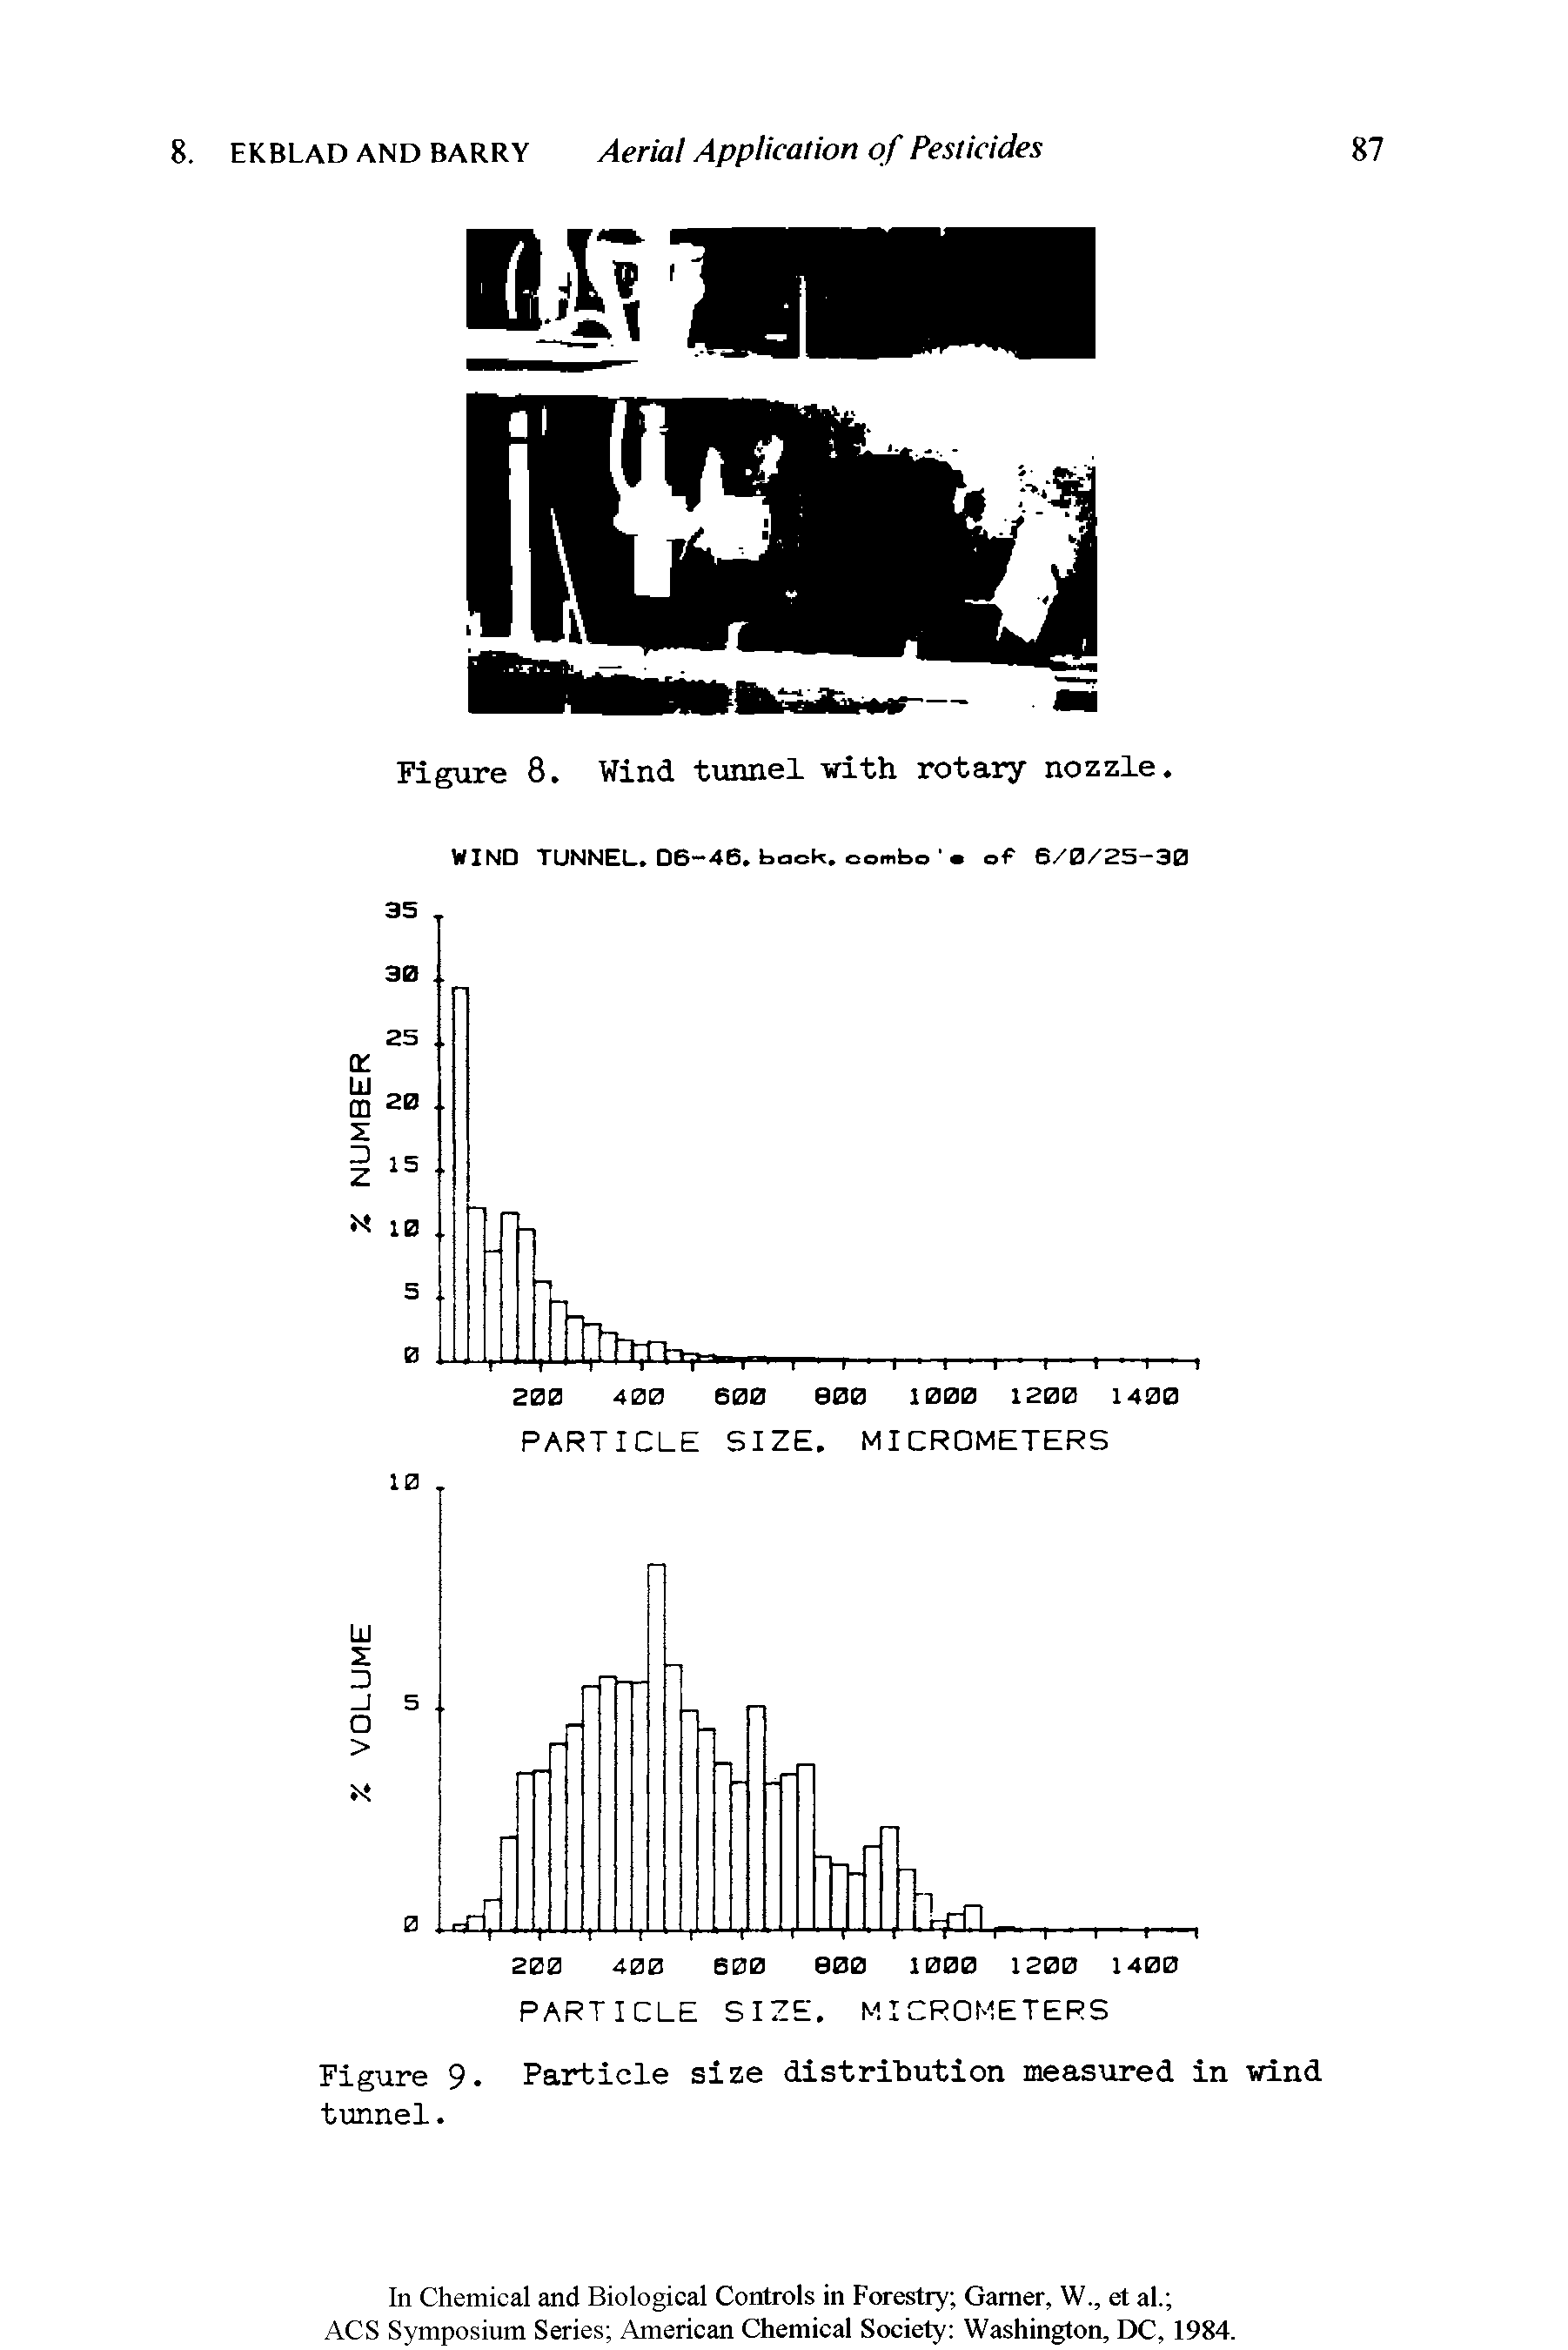 Figure 9. Particle size distribution measured in wind tunnel.